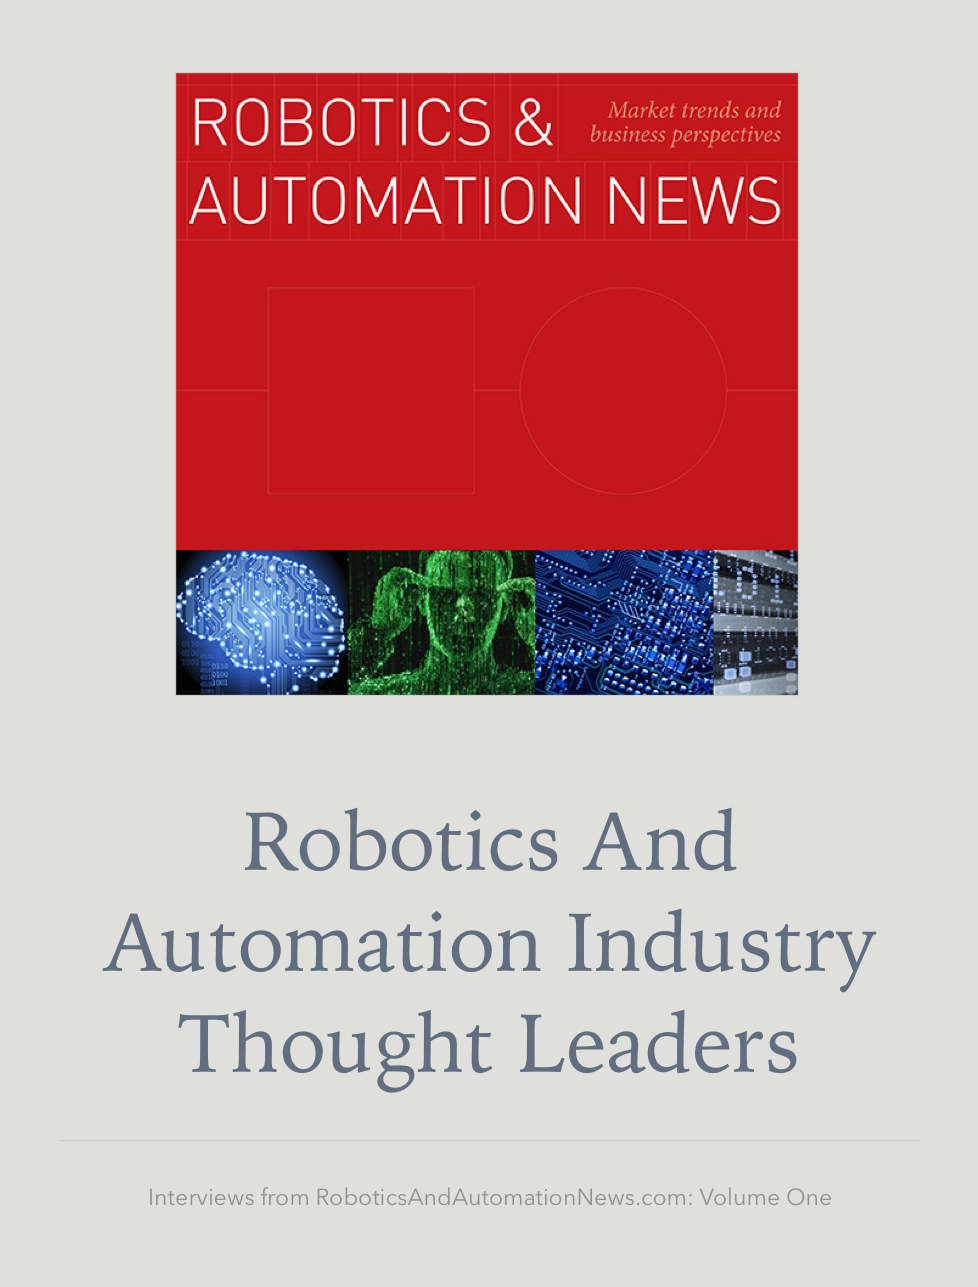 Don’t forget our new ebook – Robotics and Automation Industry Thought Leaders – is out now